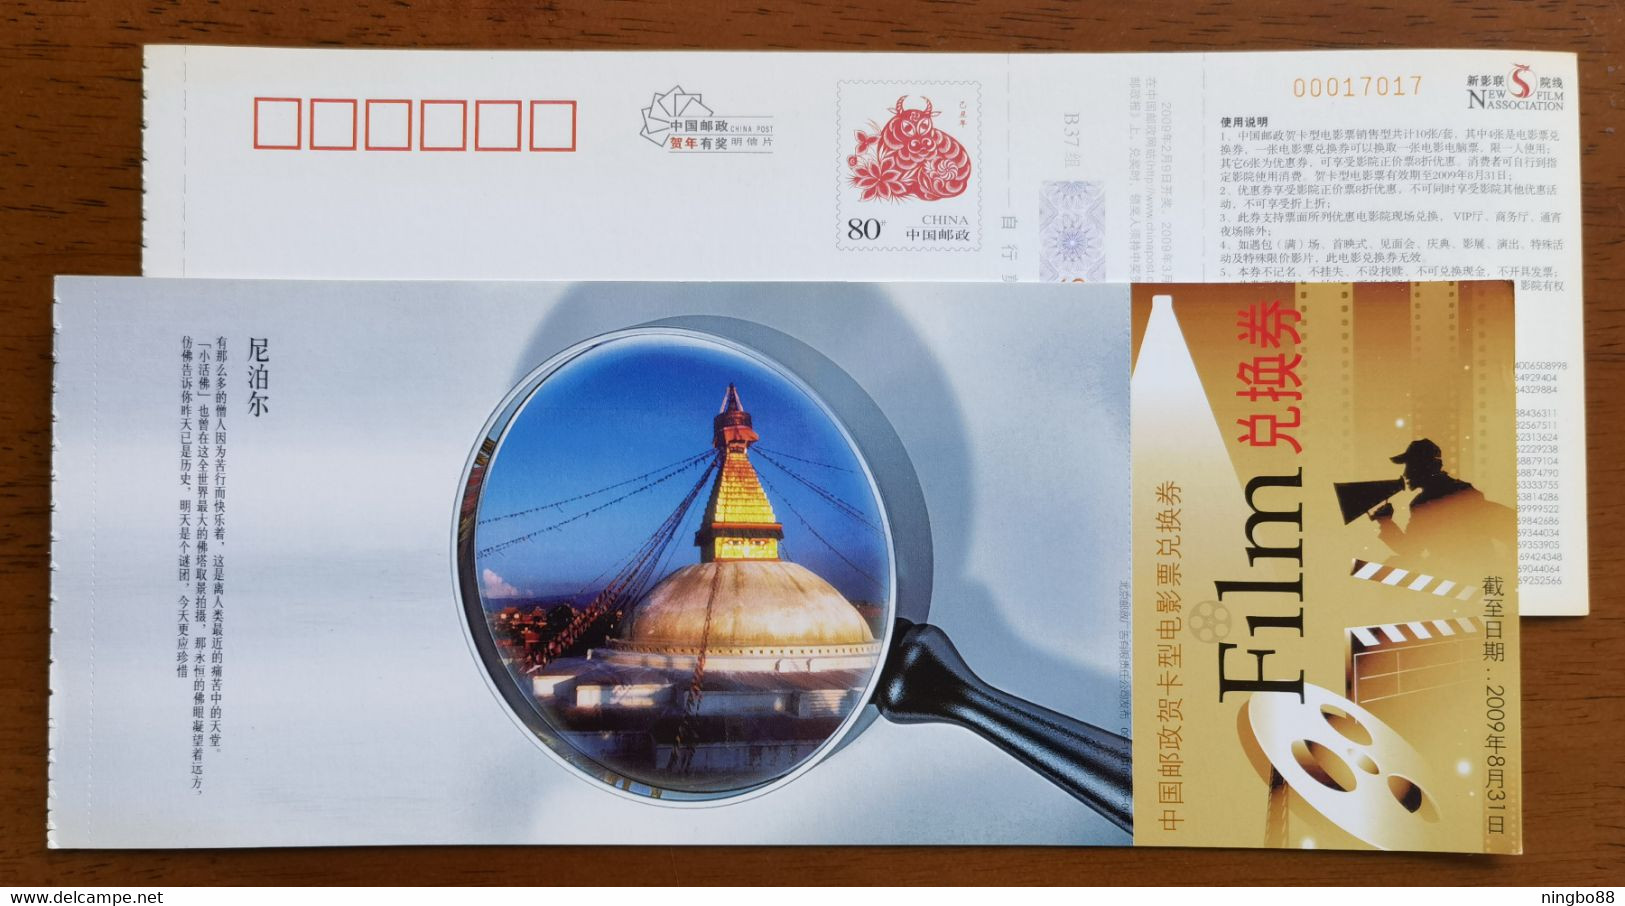 World Heritage The Bodhnath Stupa In Nepal,CN 09 Beijing New Film Cinema Association Convertible Note Pre-stamped Card - Buddhism